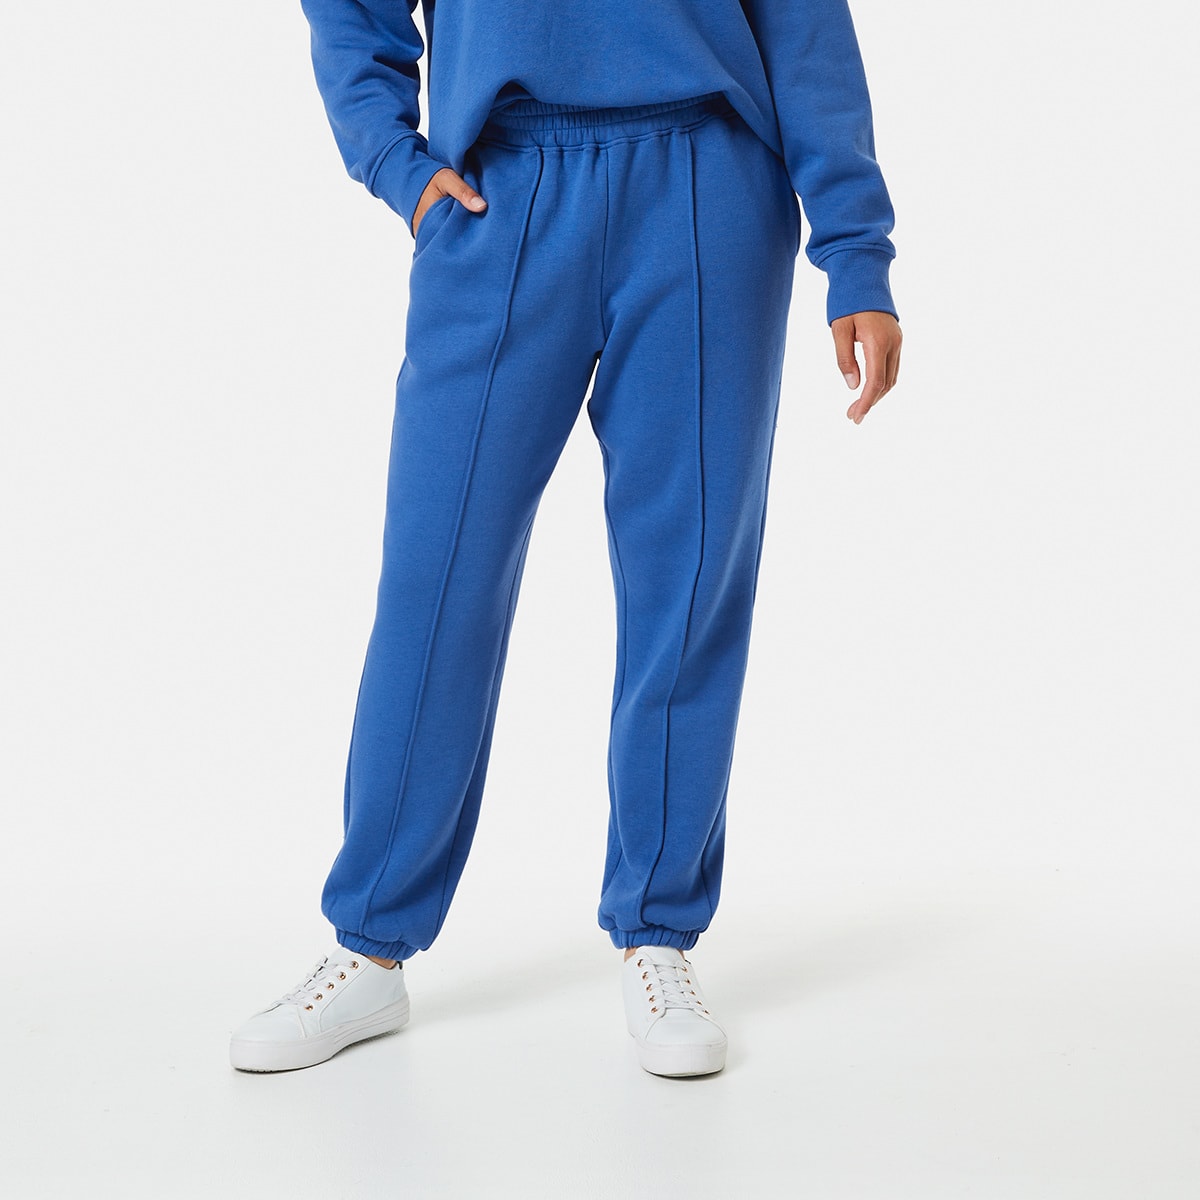 Shop Trackpants Online and in Store  Kmart